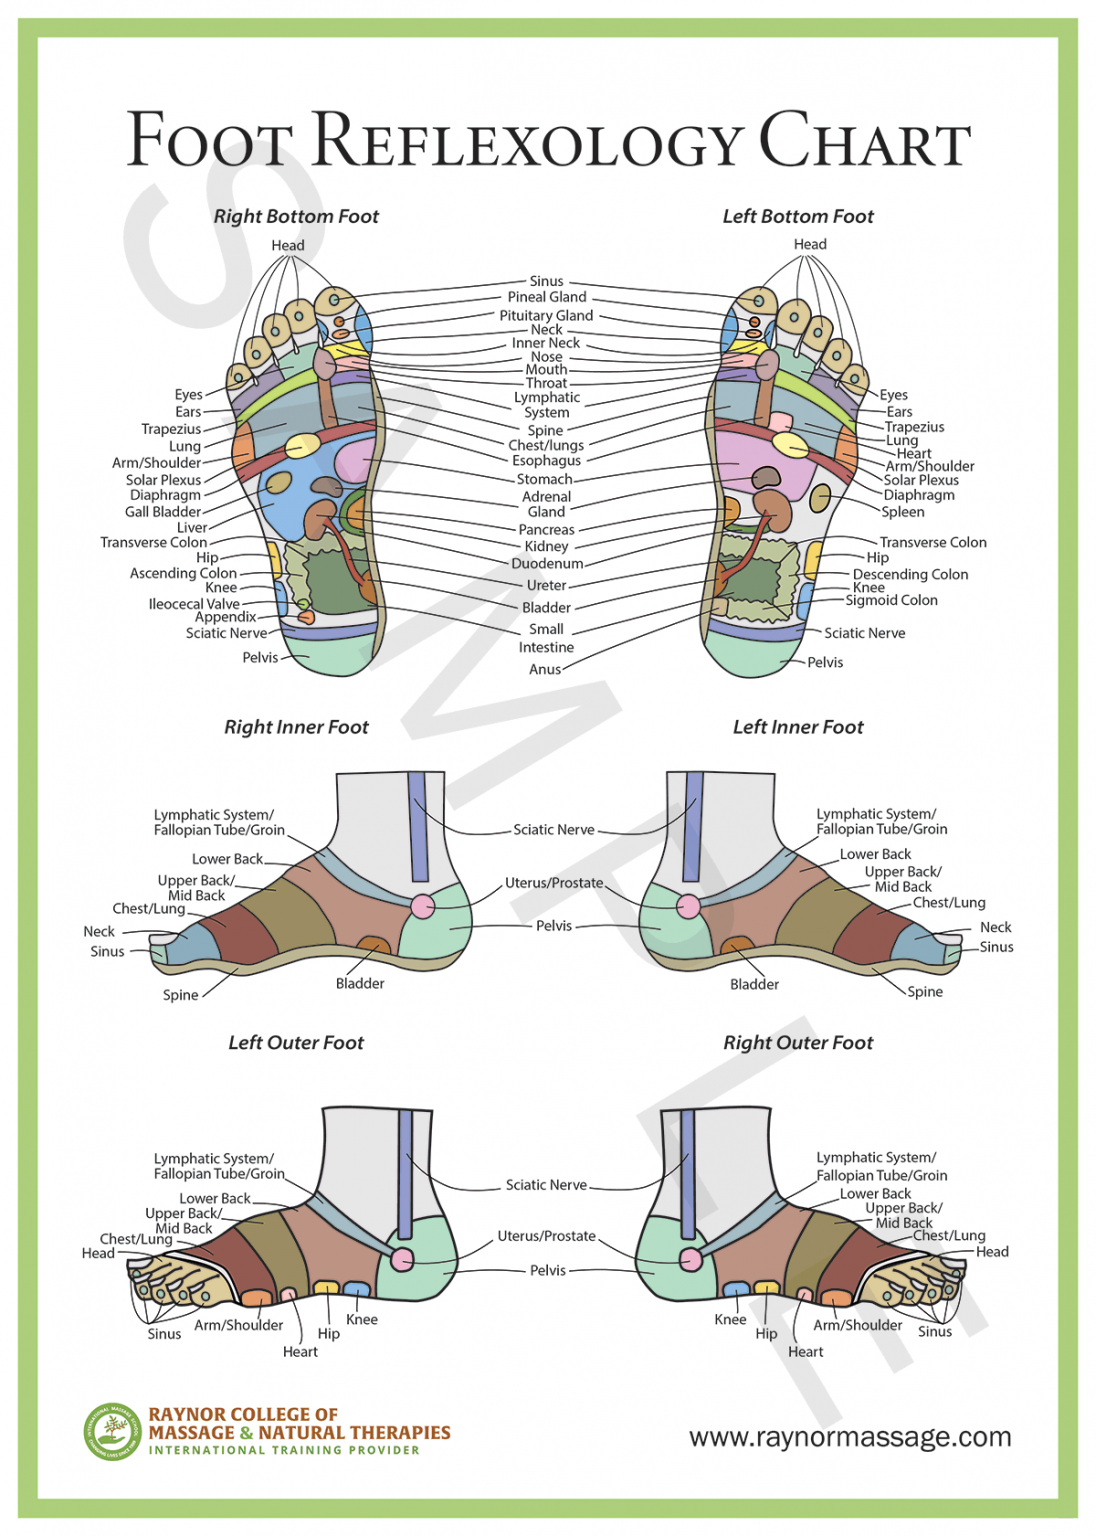 Foot Reflexology Raynor Massage Poster Cad Raynor College Of Massage And Natural Therapies